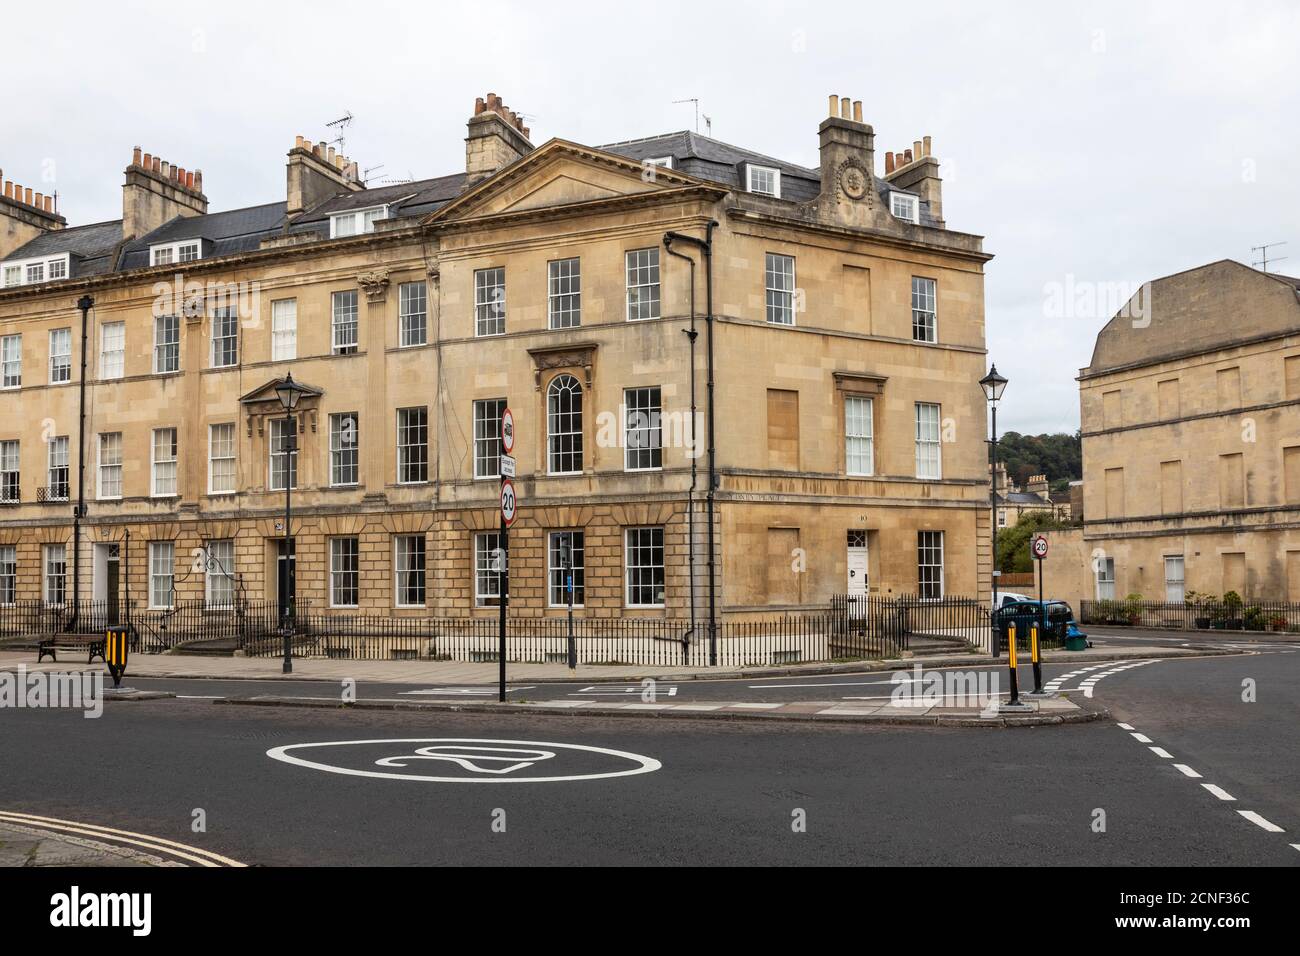 3 Storey Georgian terraced houses on the corner of Sydney Place and Great Pulteney Street in the City of Bath, Somerset, England, UK Stock Photo